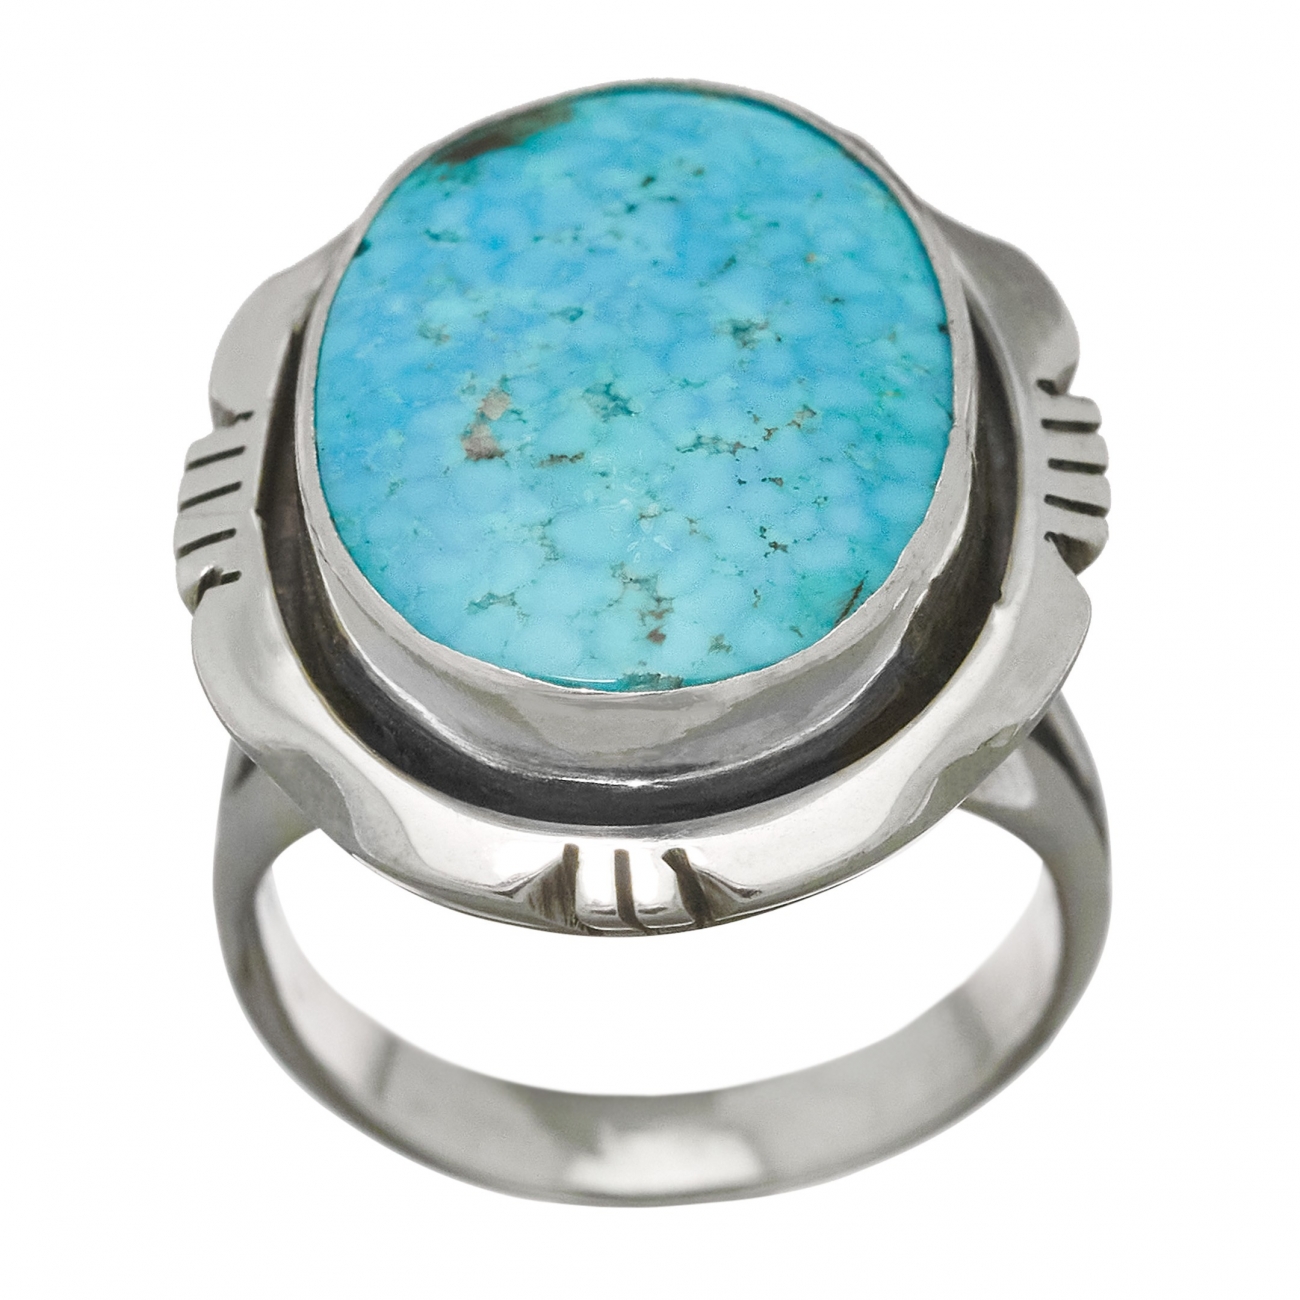 Navajo ring BA651 in turquoise and silver for women, Harpo Paris